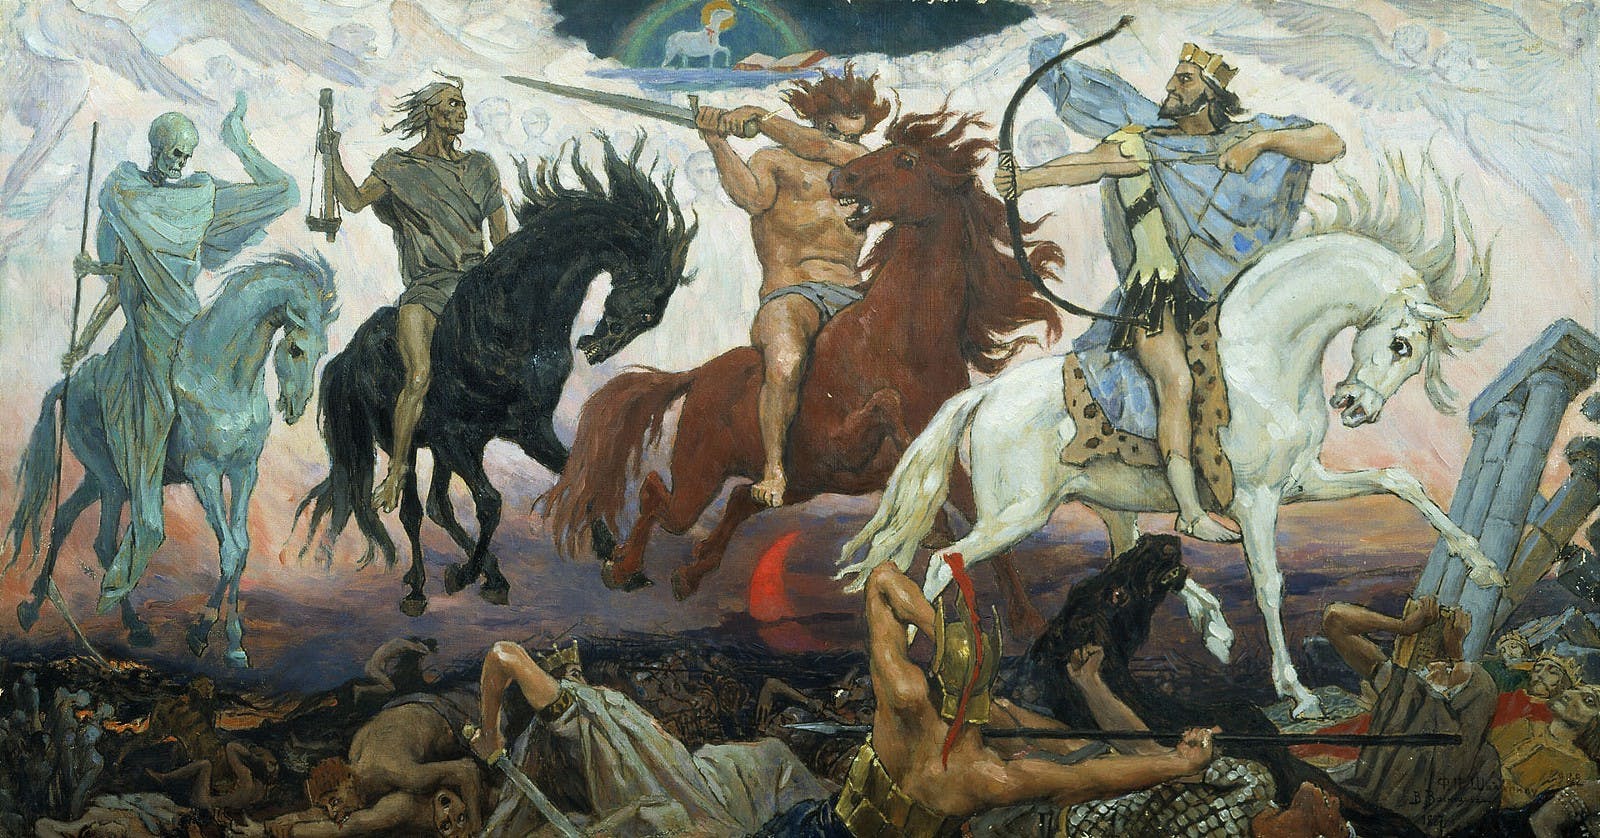 /the-four-horsemen-of-the-cryptocalypse-33acee1d79ac feature image